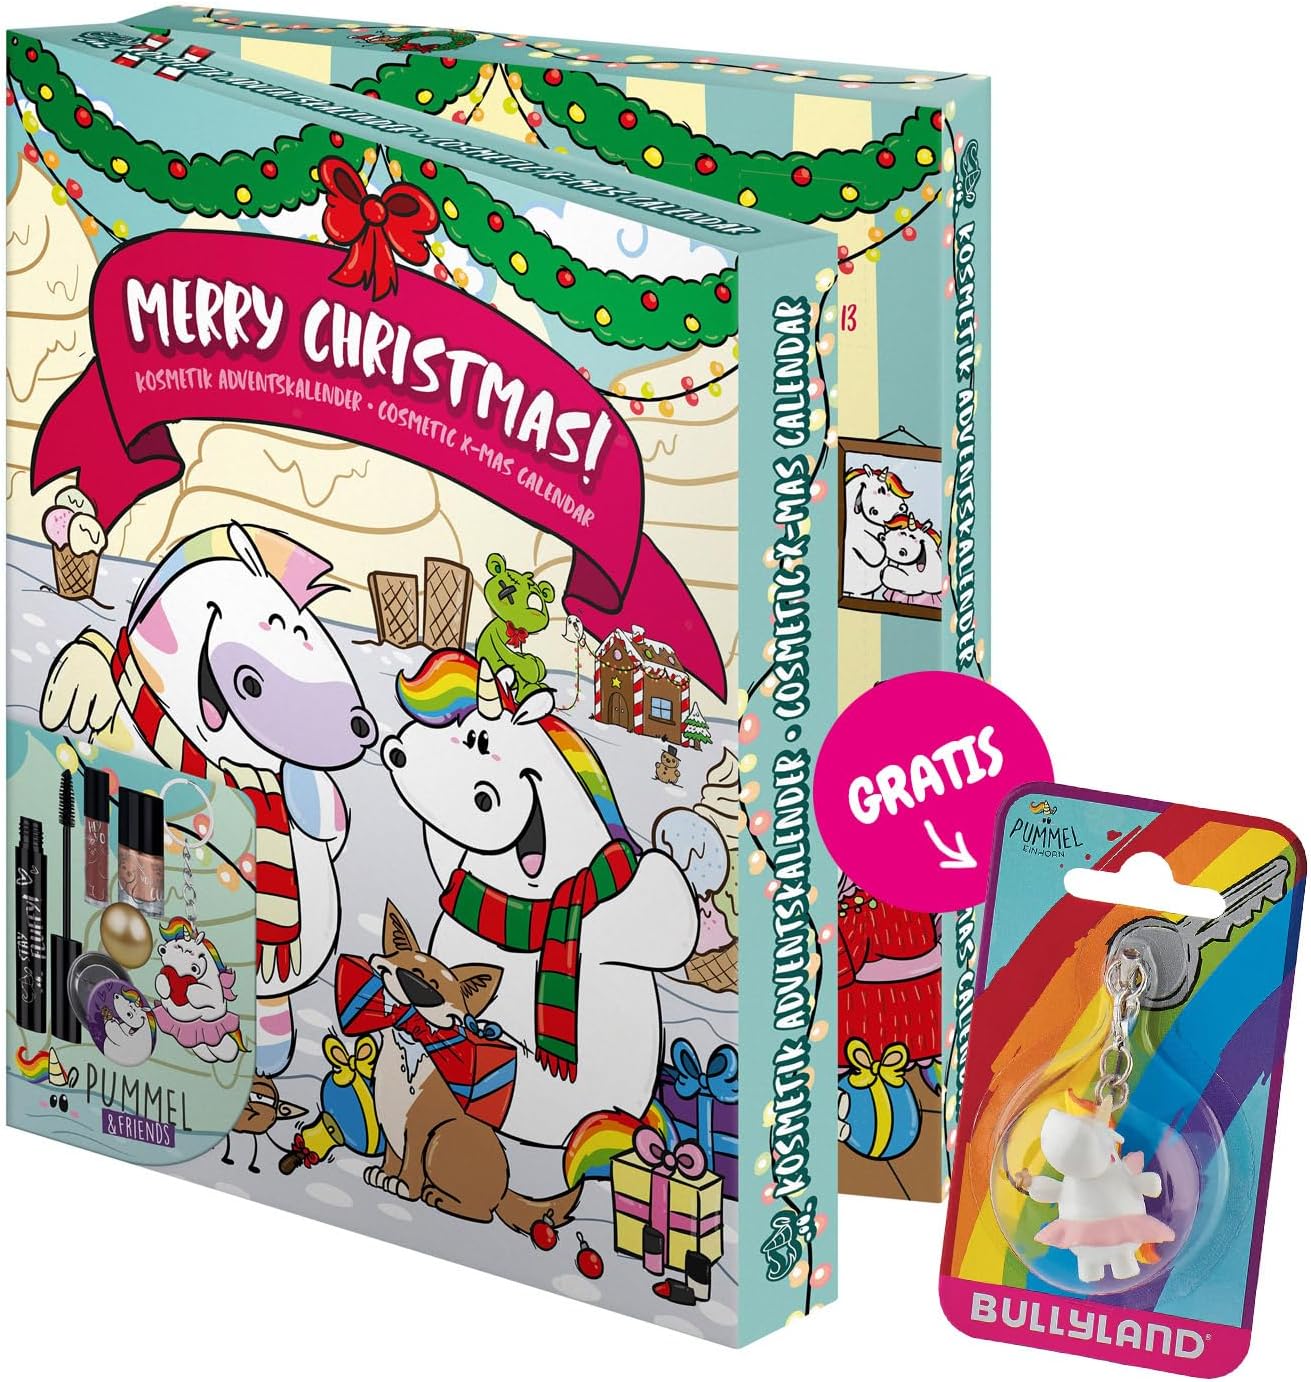 Unicorn Advent Calendar for Children, Filled with Accessories, Beauty and Cosmetic Products by Pummeleinhorn, in Decorative Box for Standing, Loving Gift Idea for Girls and Unicorn Fans